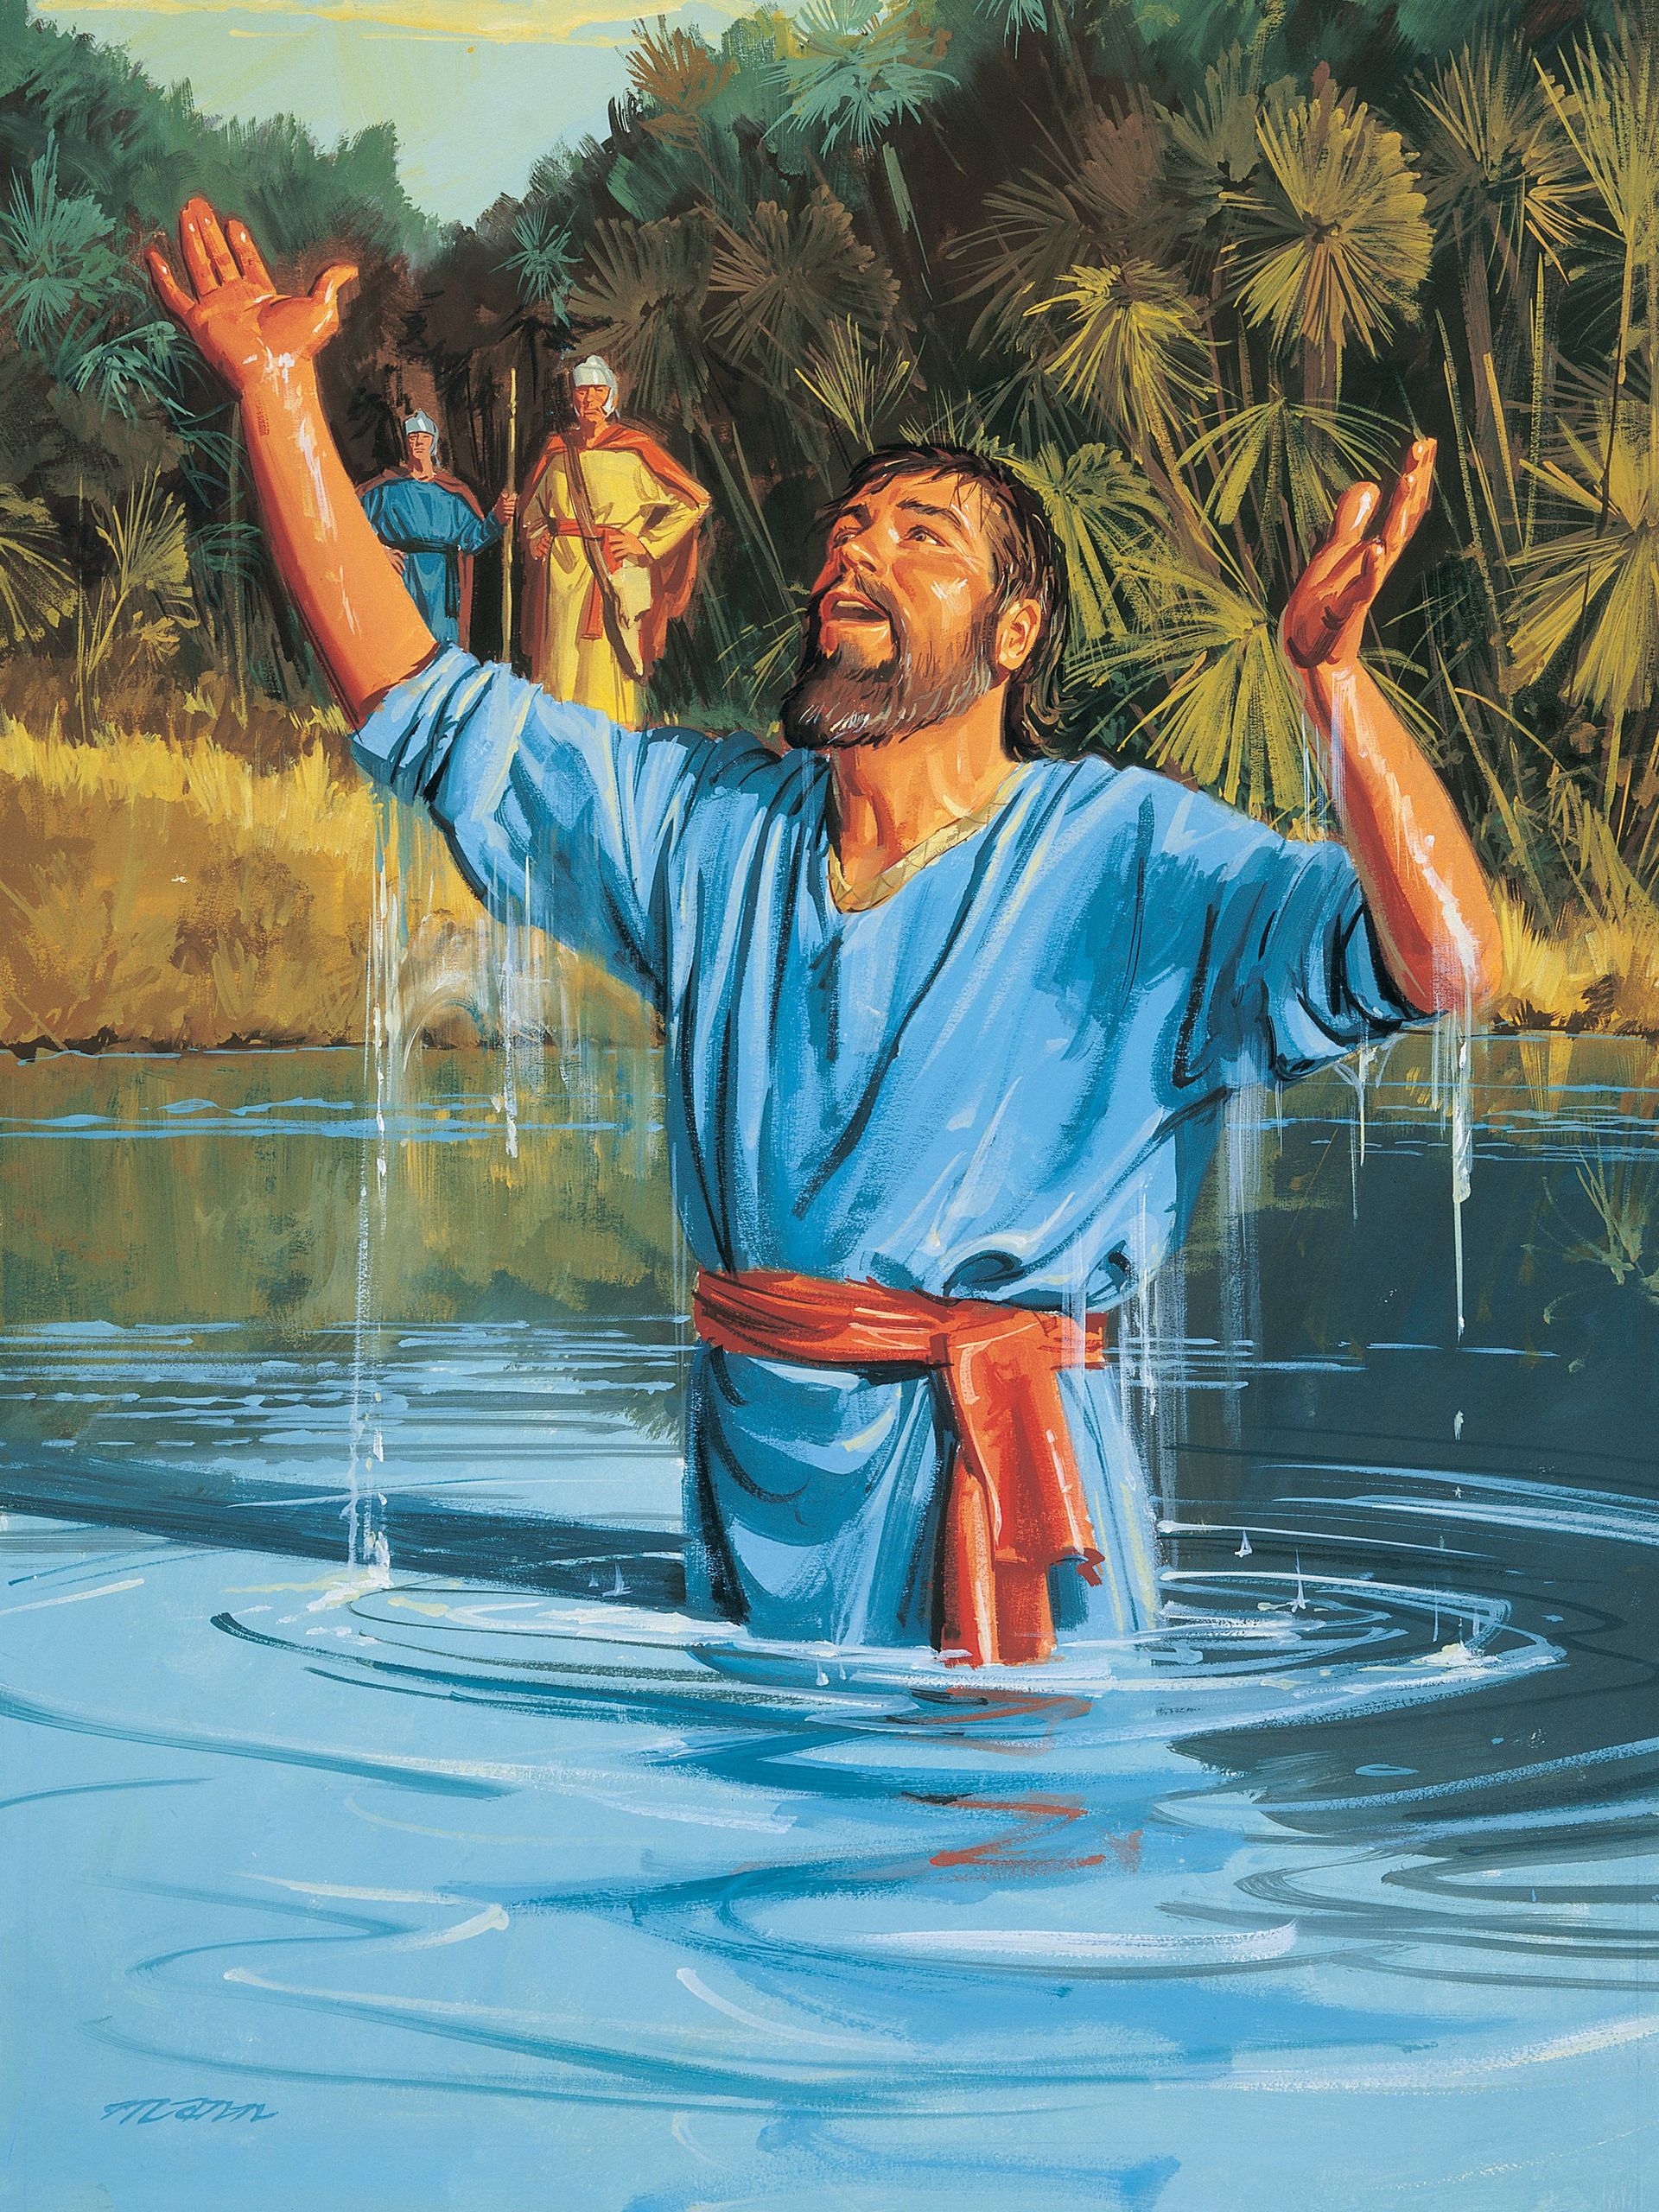 Painting of the Old Testament figure Naaman coming joyfully out of the Jordan River, cured of his leprosy.